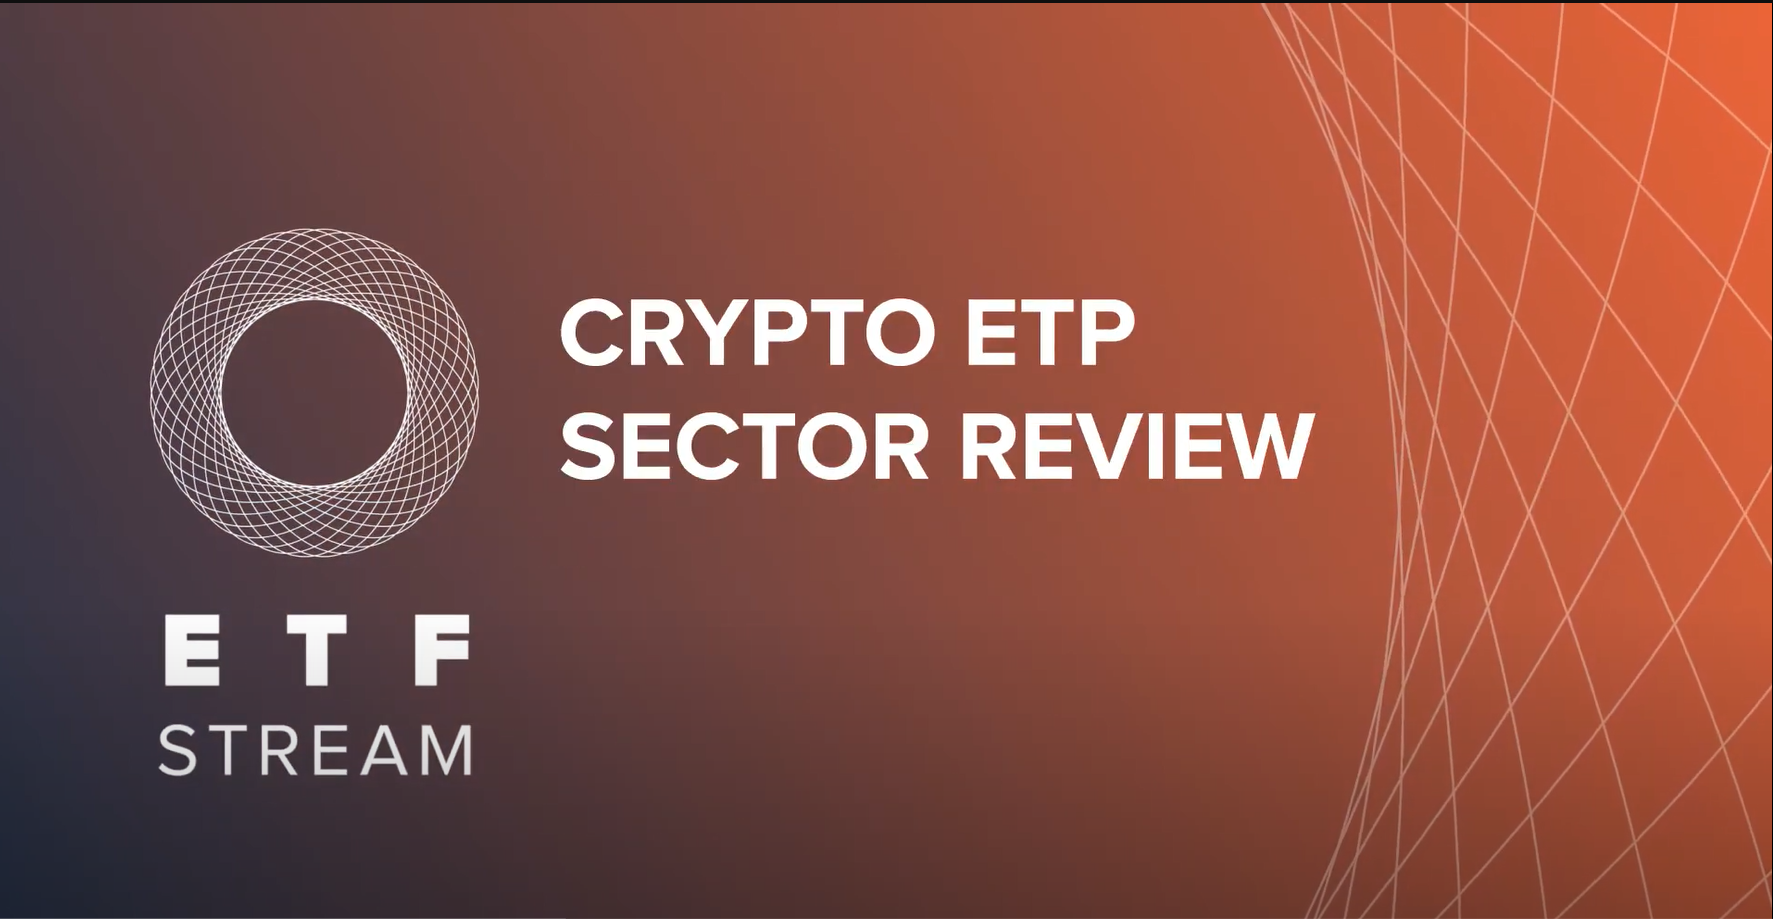 Crypto ETF Sector Review